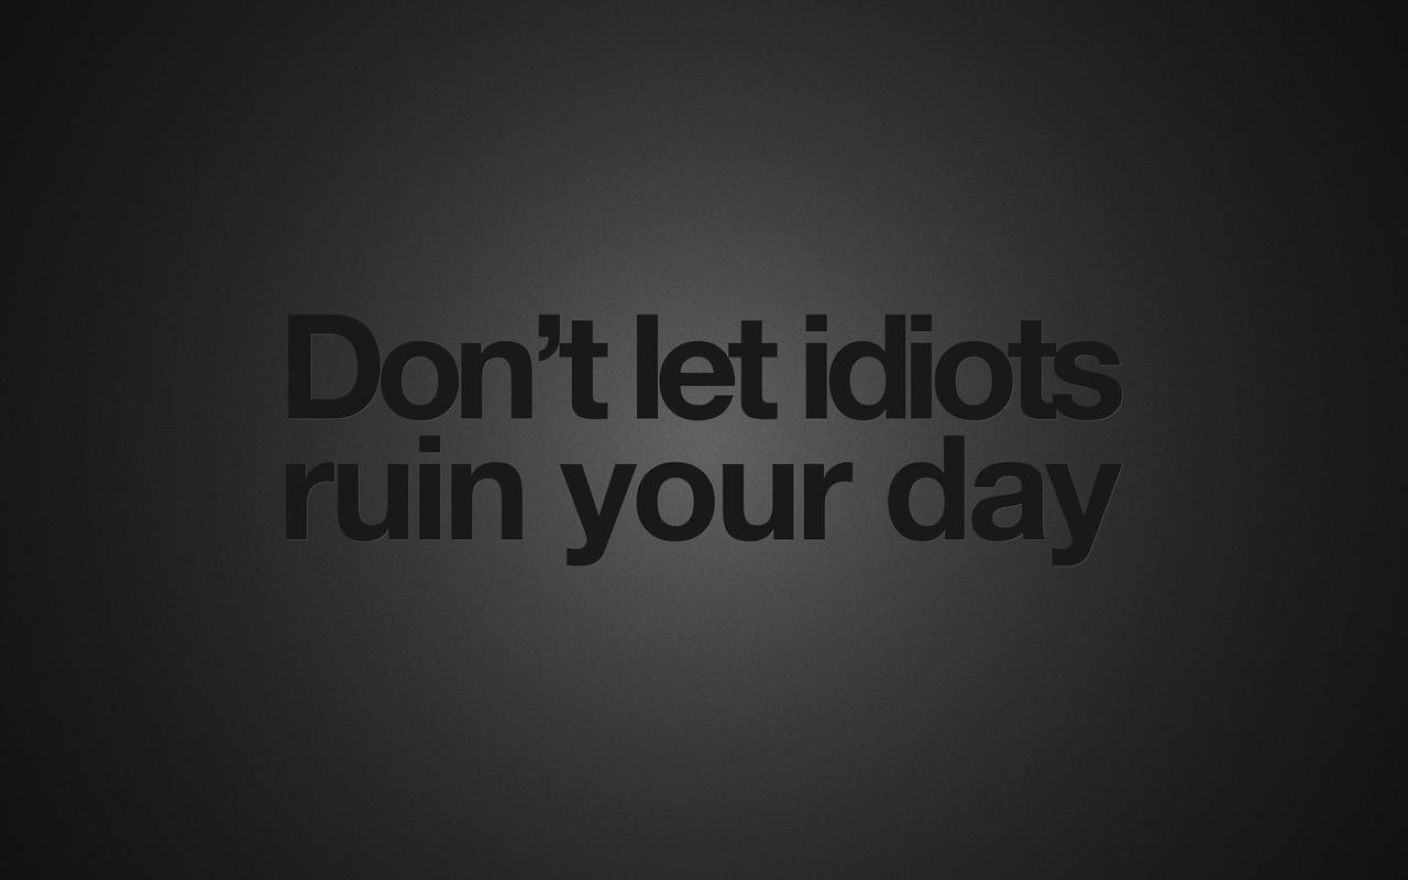 Black Background Quotes Idiots Wallpaper Hd Laptop Backgrounds